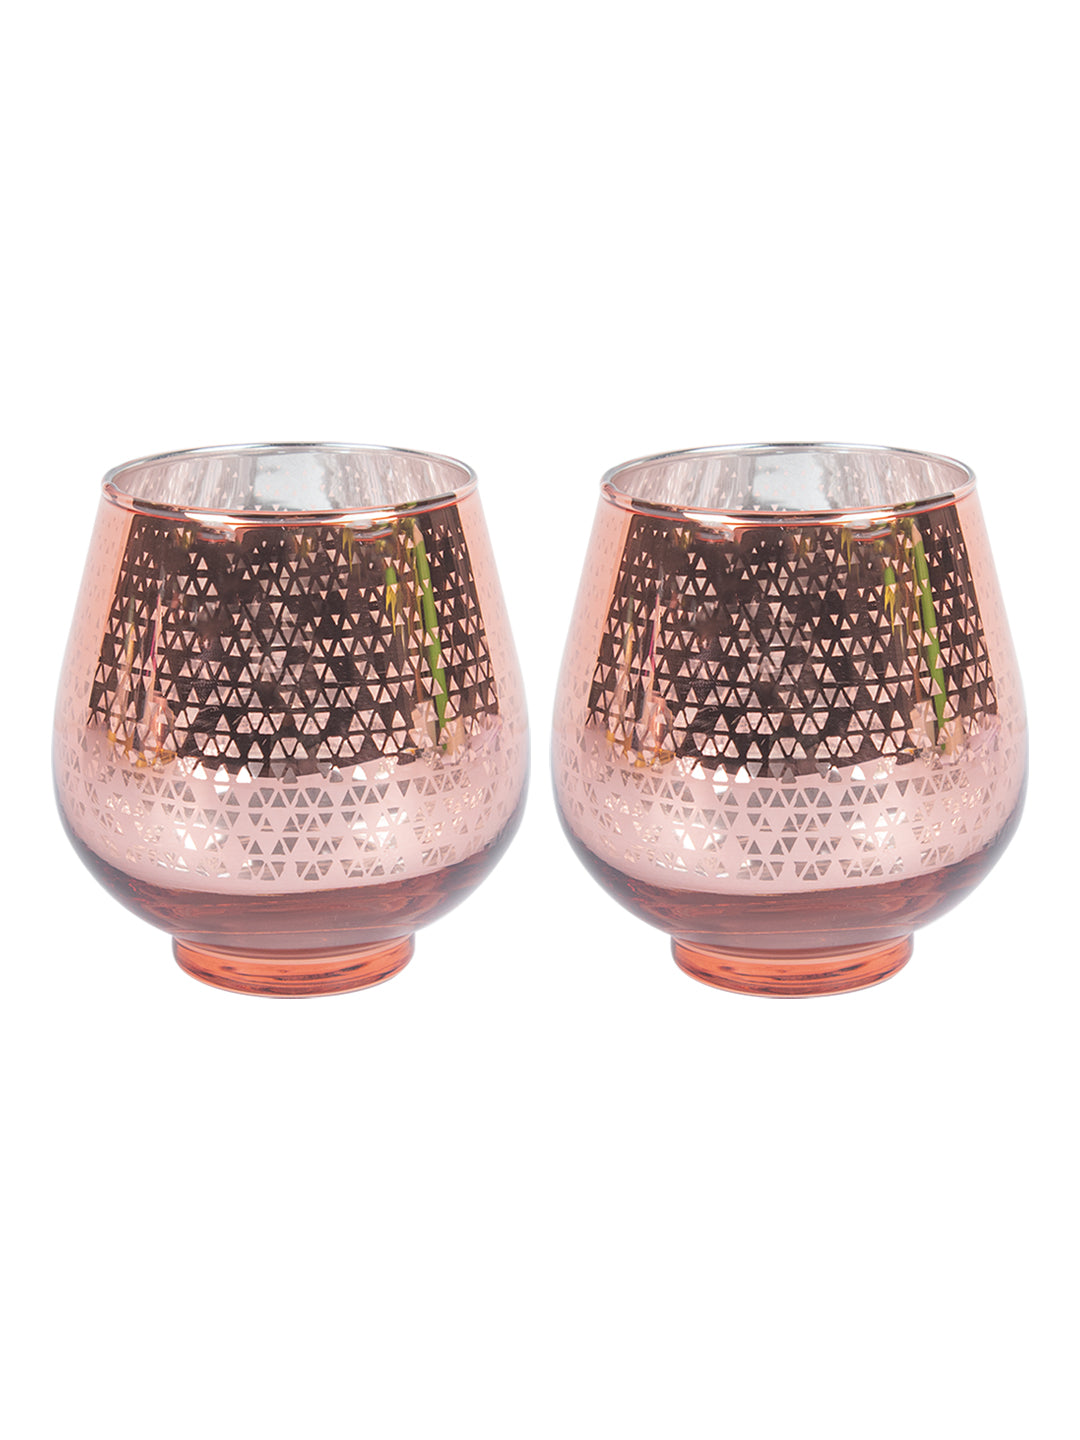 VON CASA Pink Glass Tealight Candle Holders Pack Of 2 Pcs